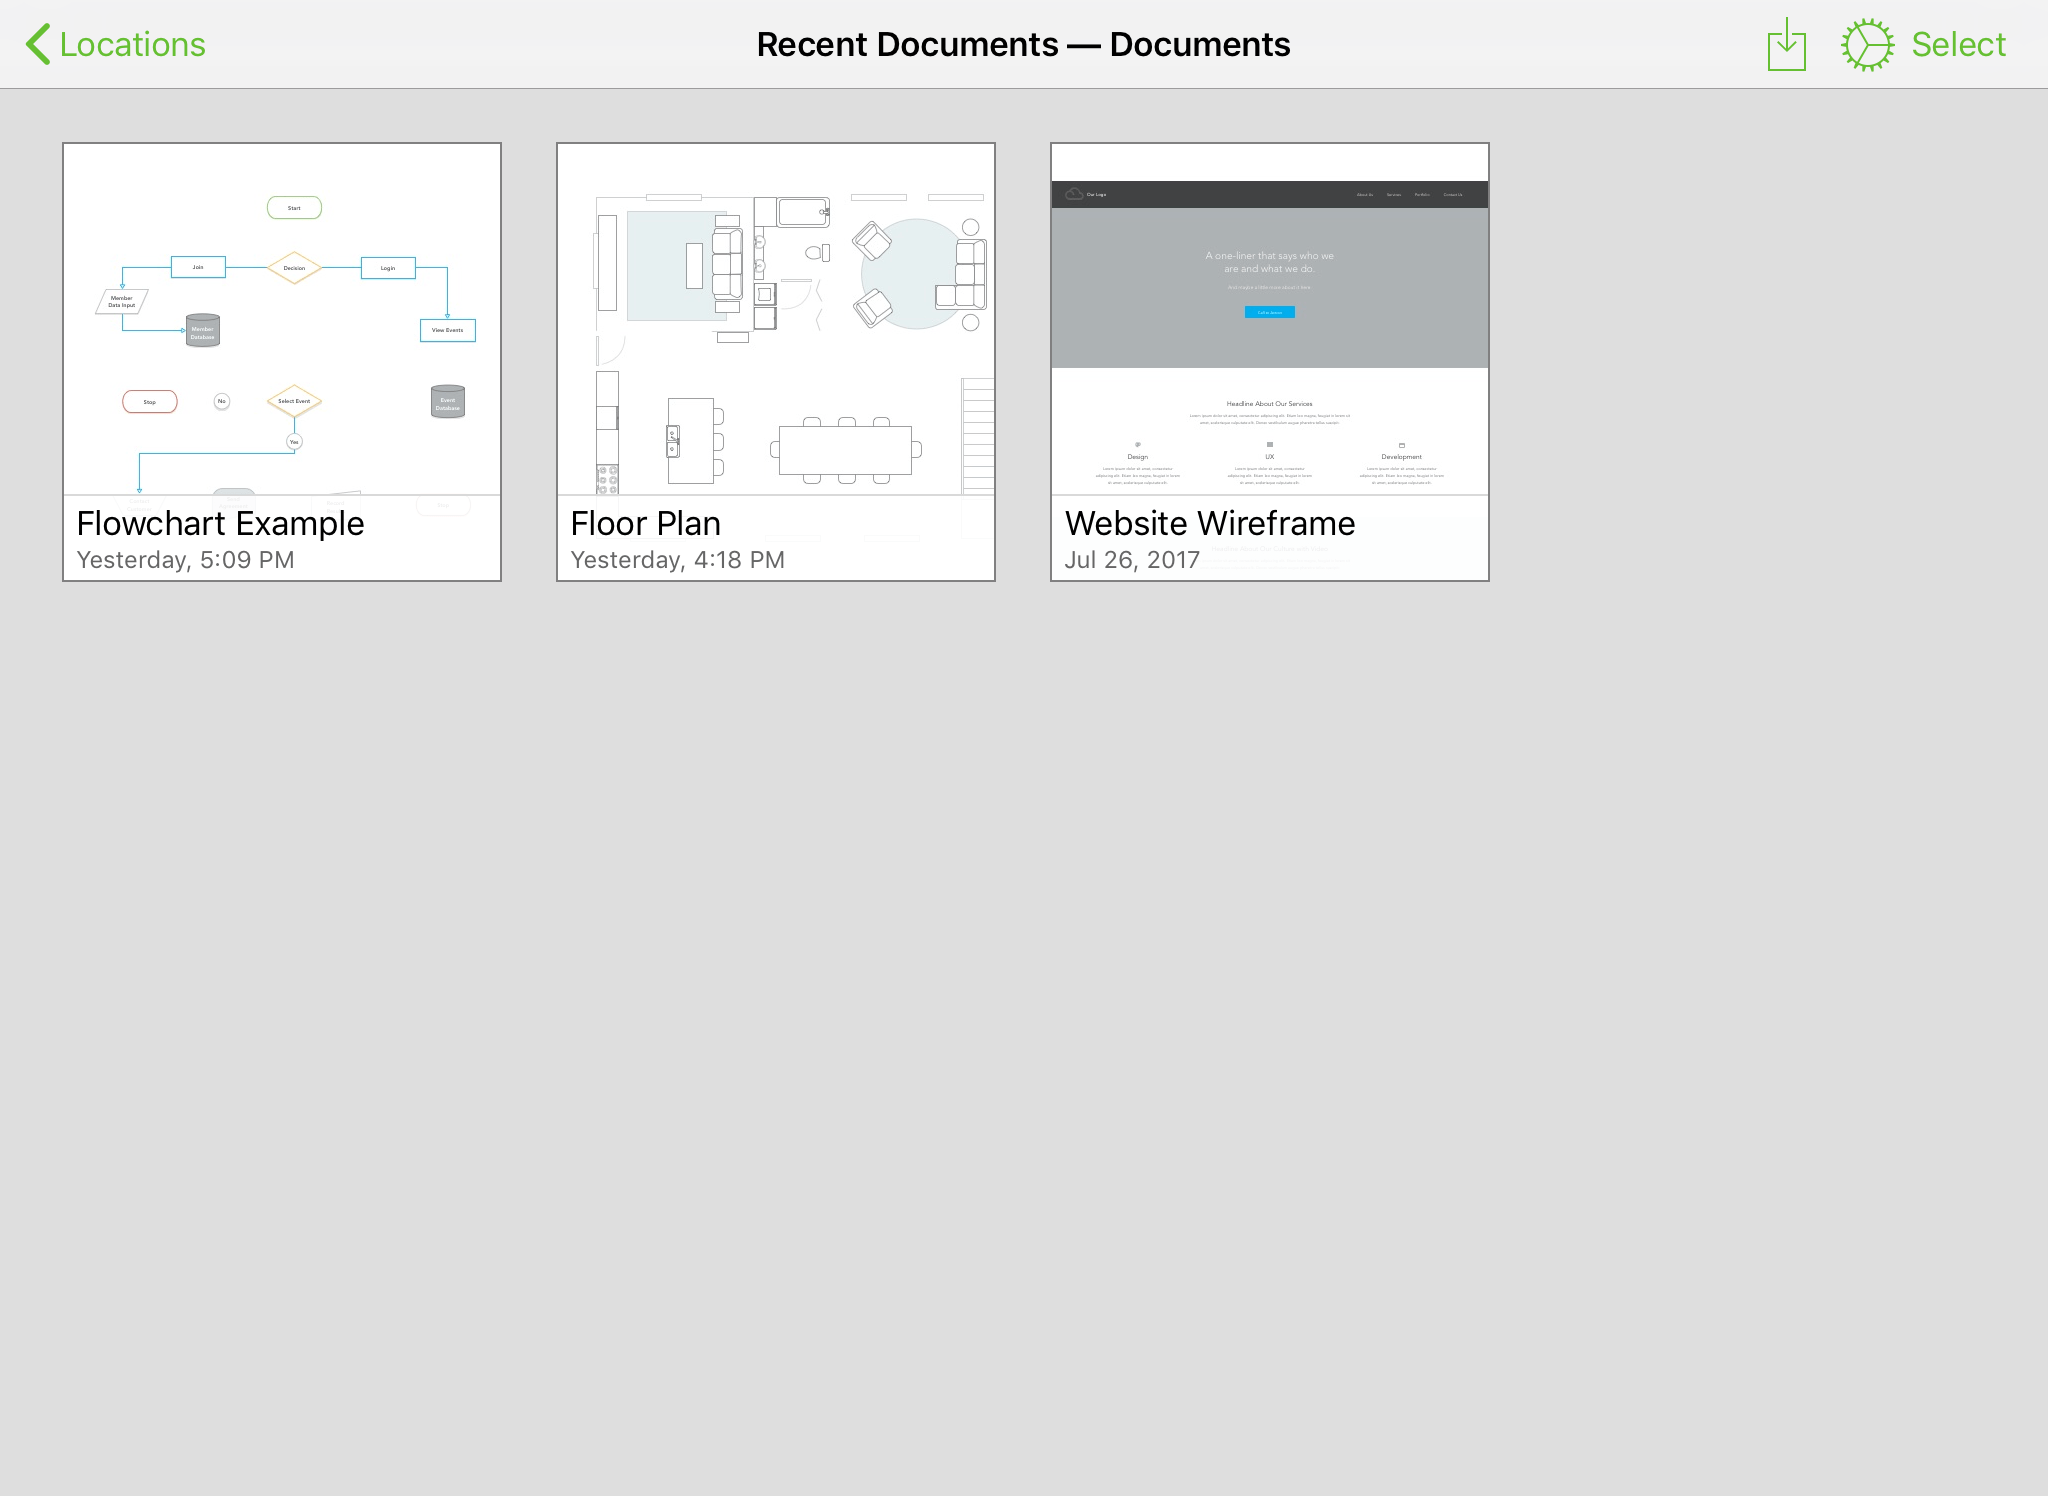 The Recent Documents folder, as viewed in the Document Browser